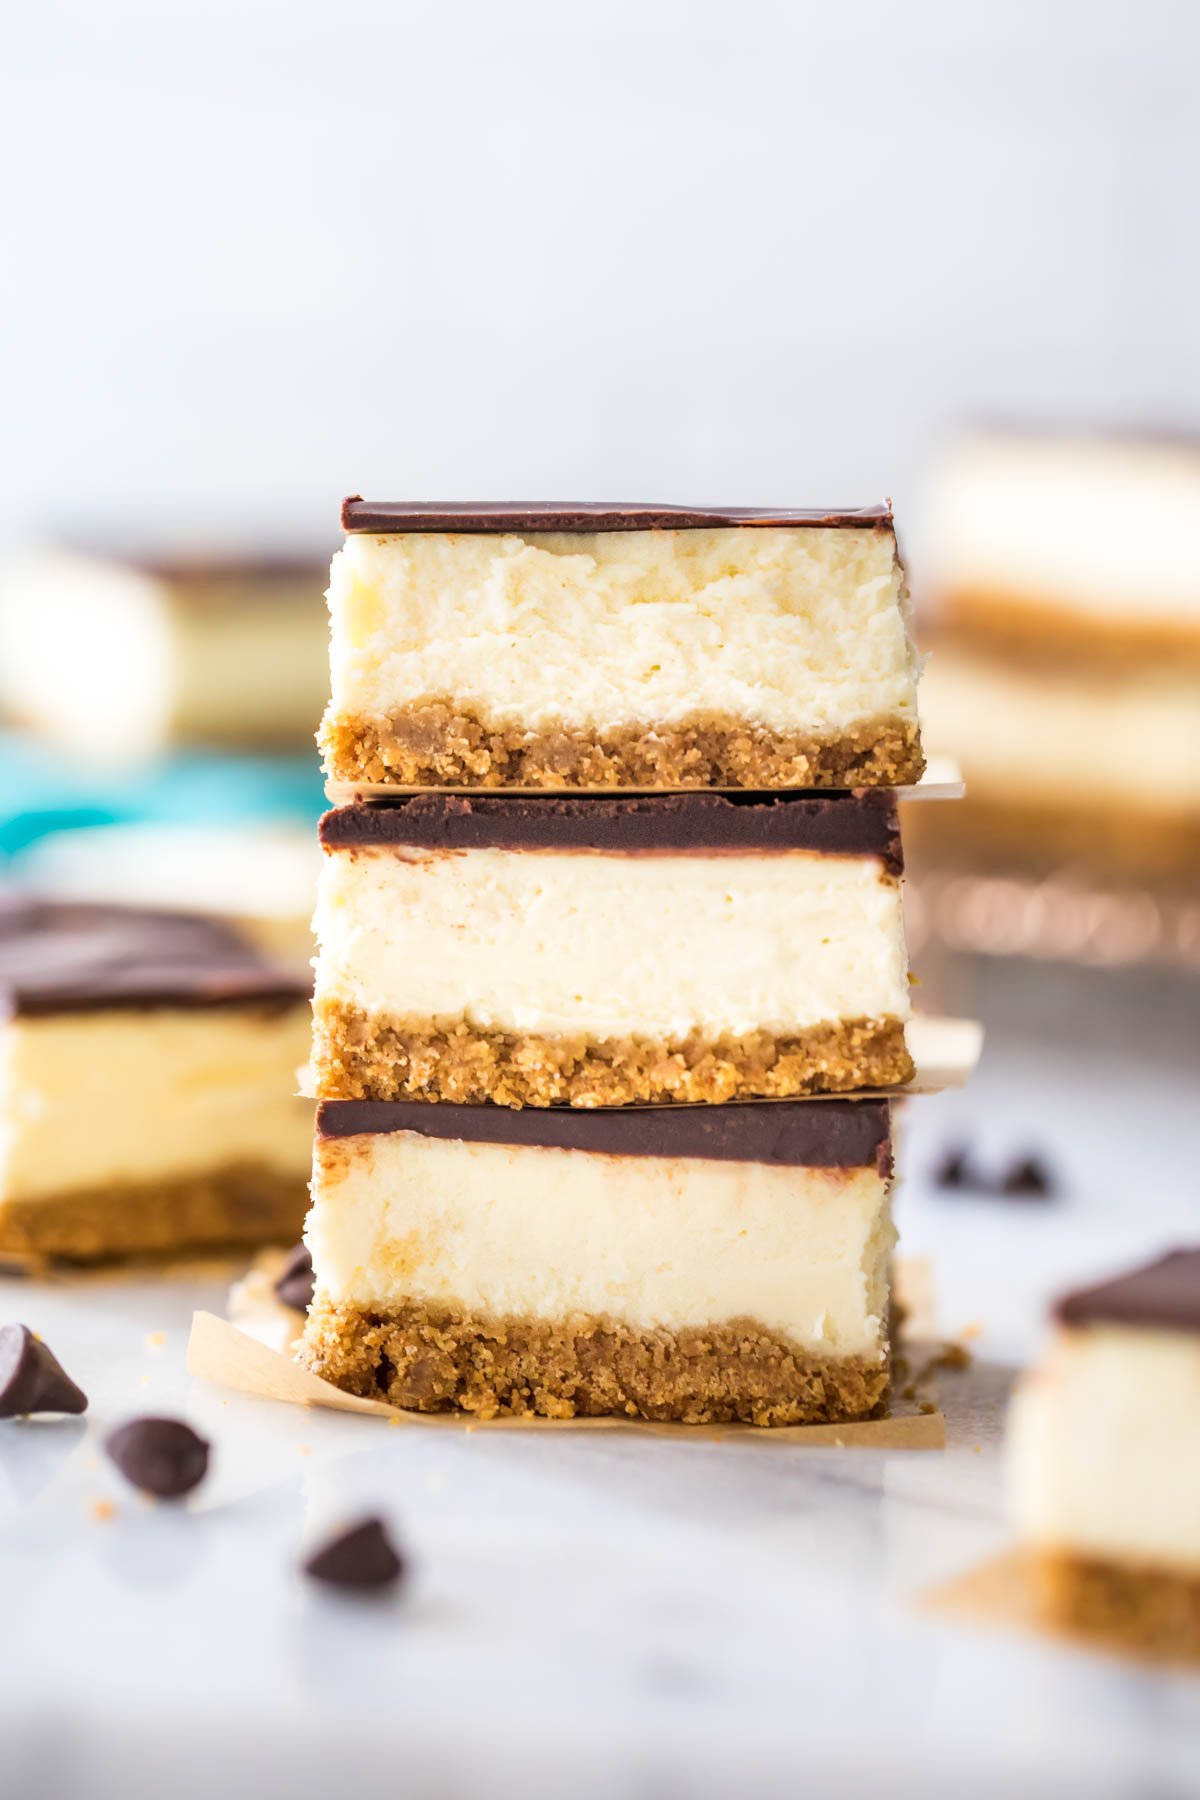 three ganache covered cheesecake bars stacked on top of each other